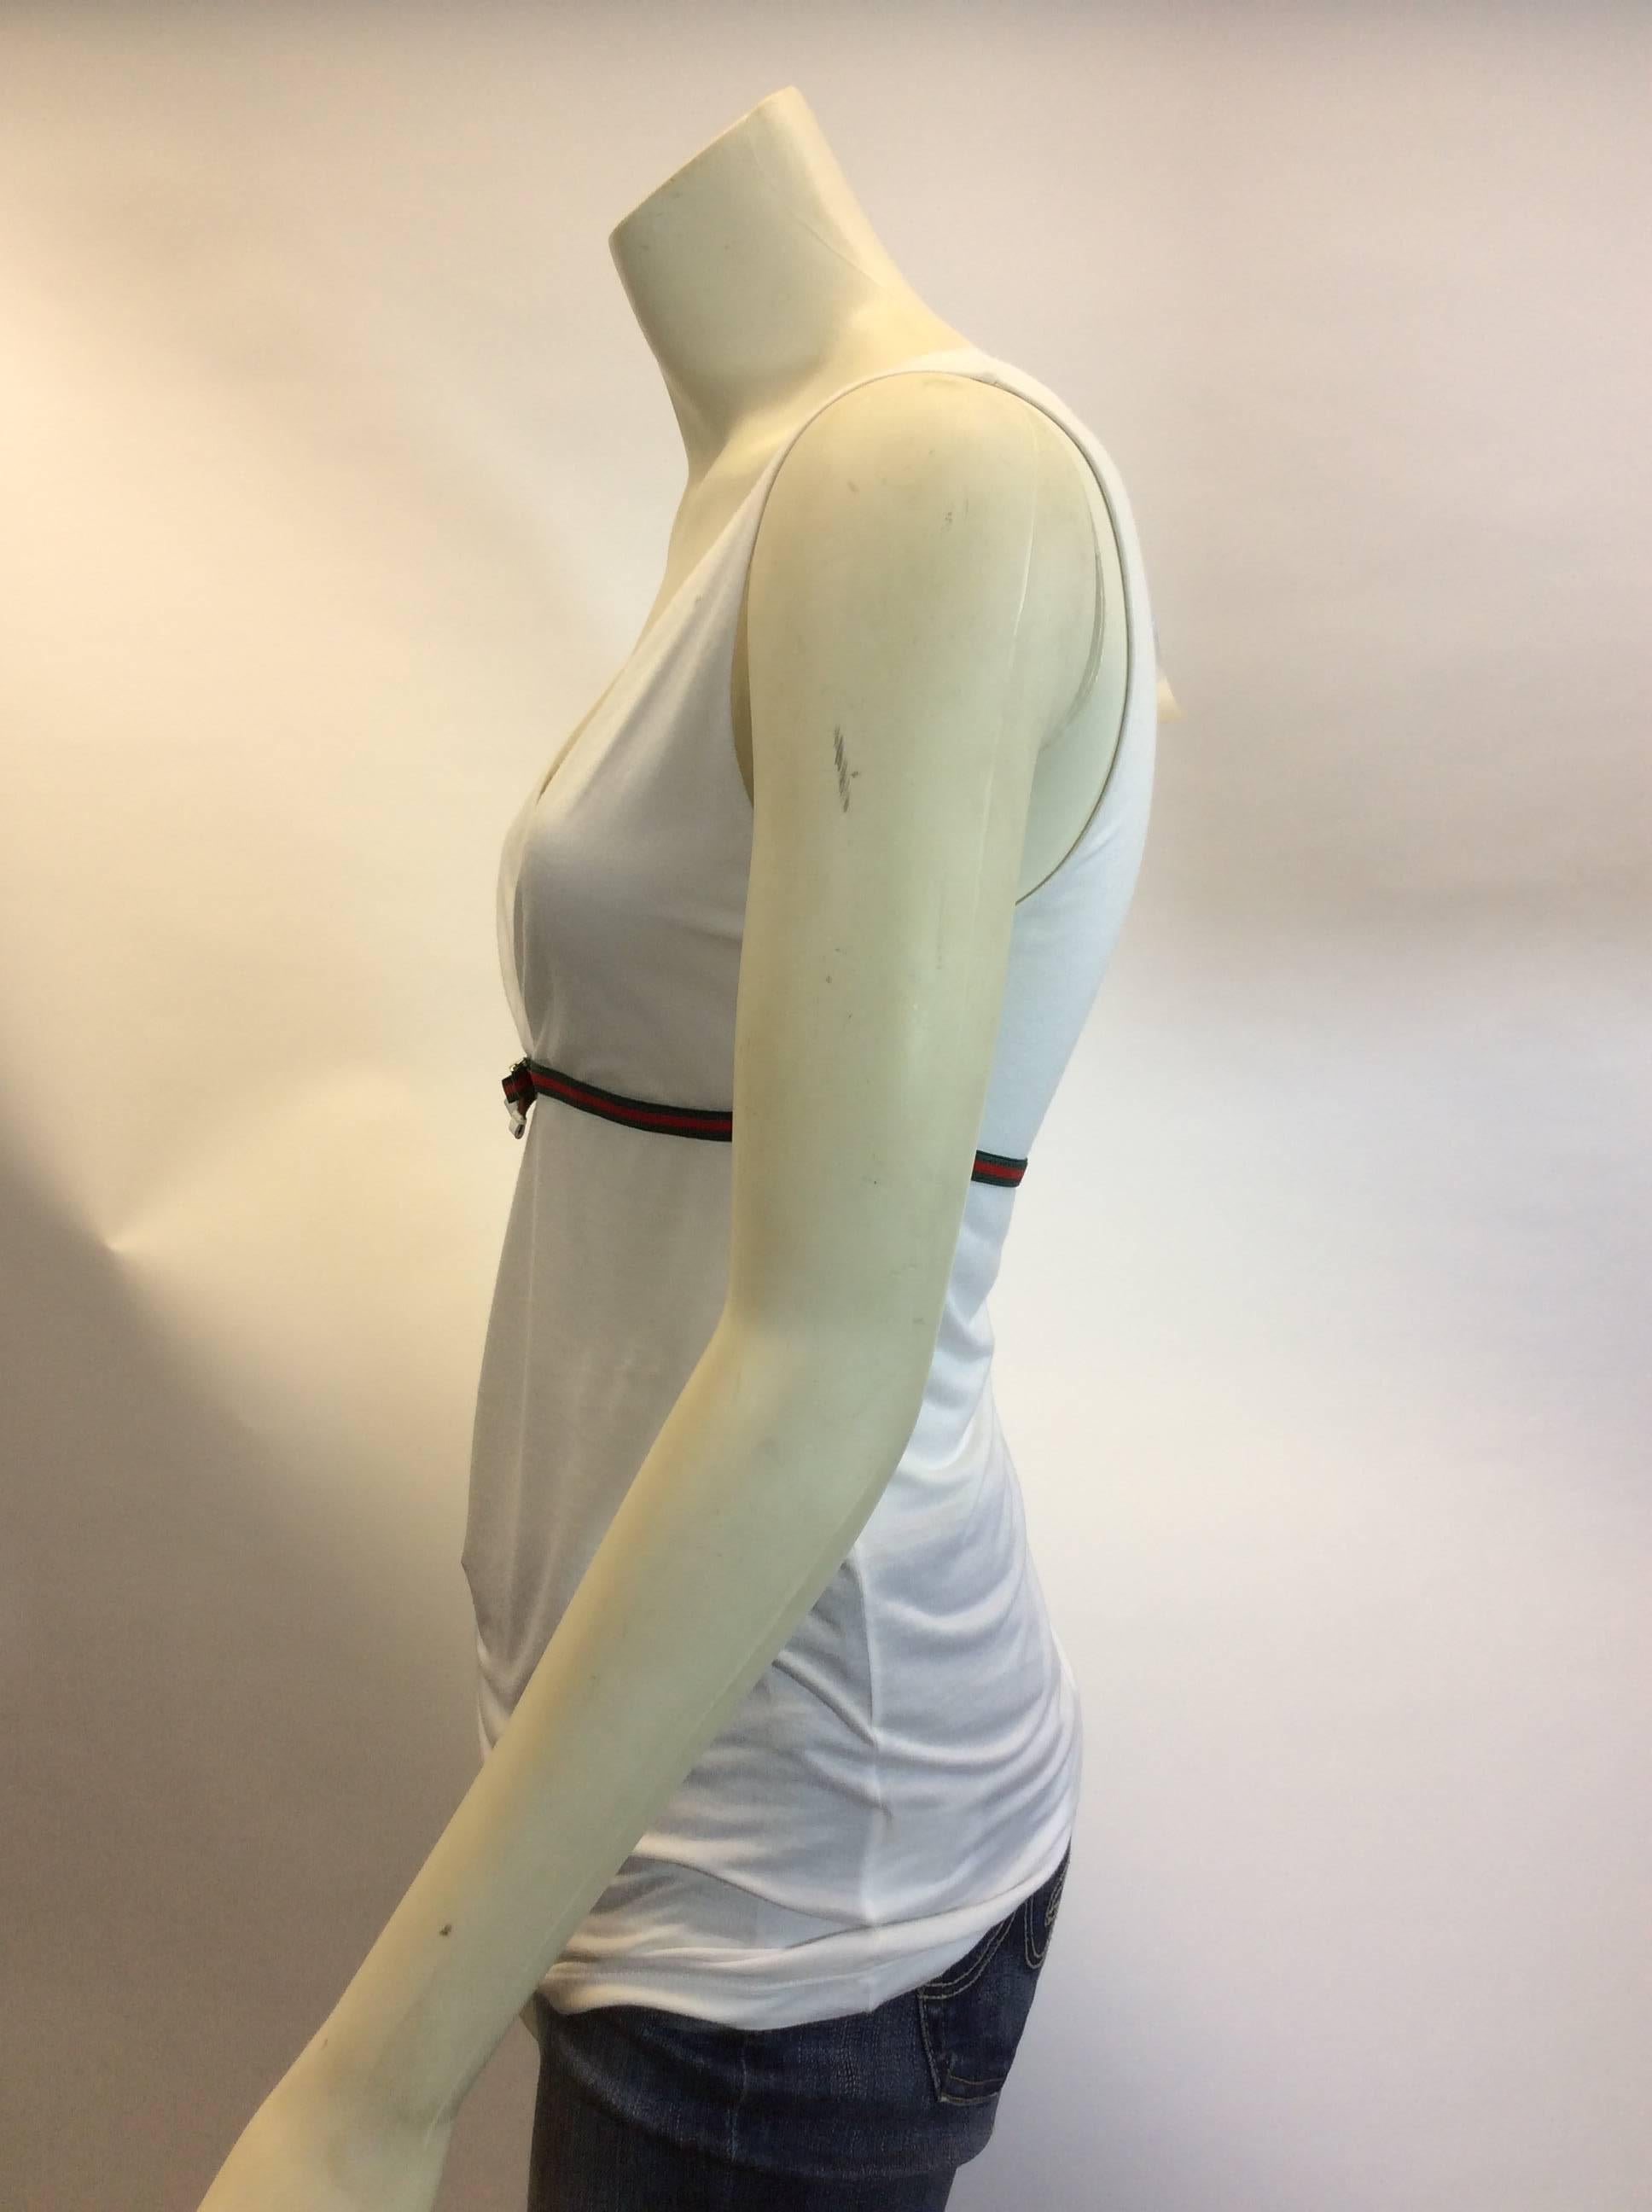 Gucci V Neck White Cotton Blouse In Excellent Condition For Sale In Narberth, PA